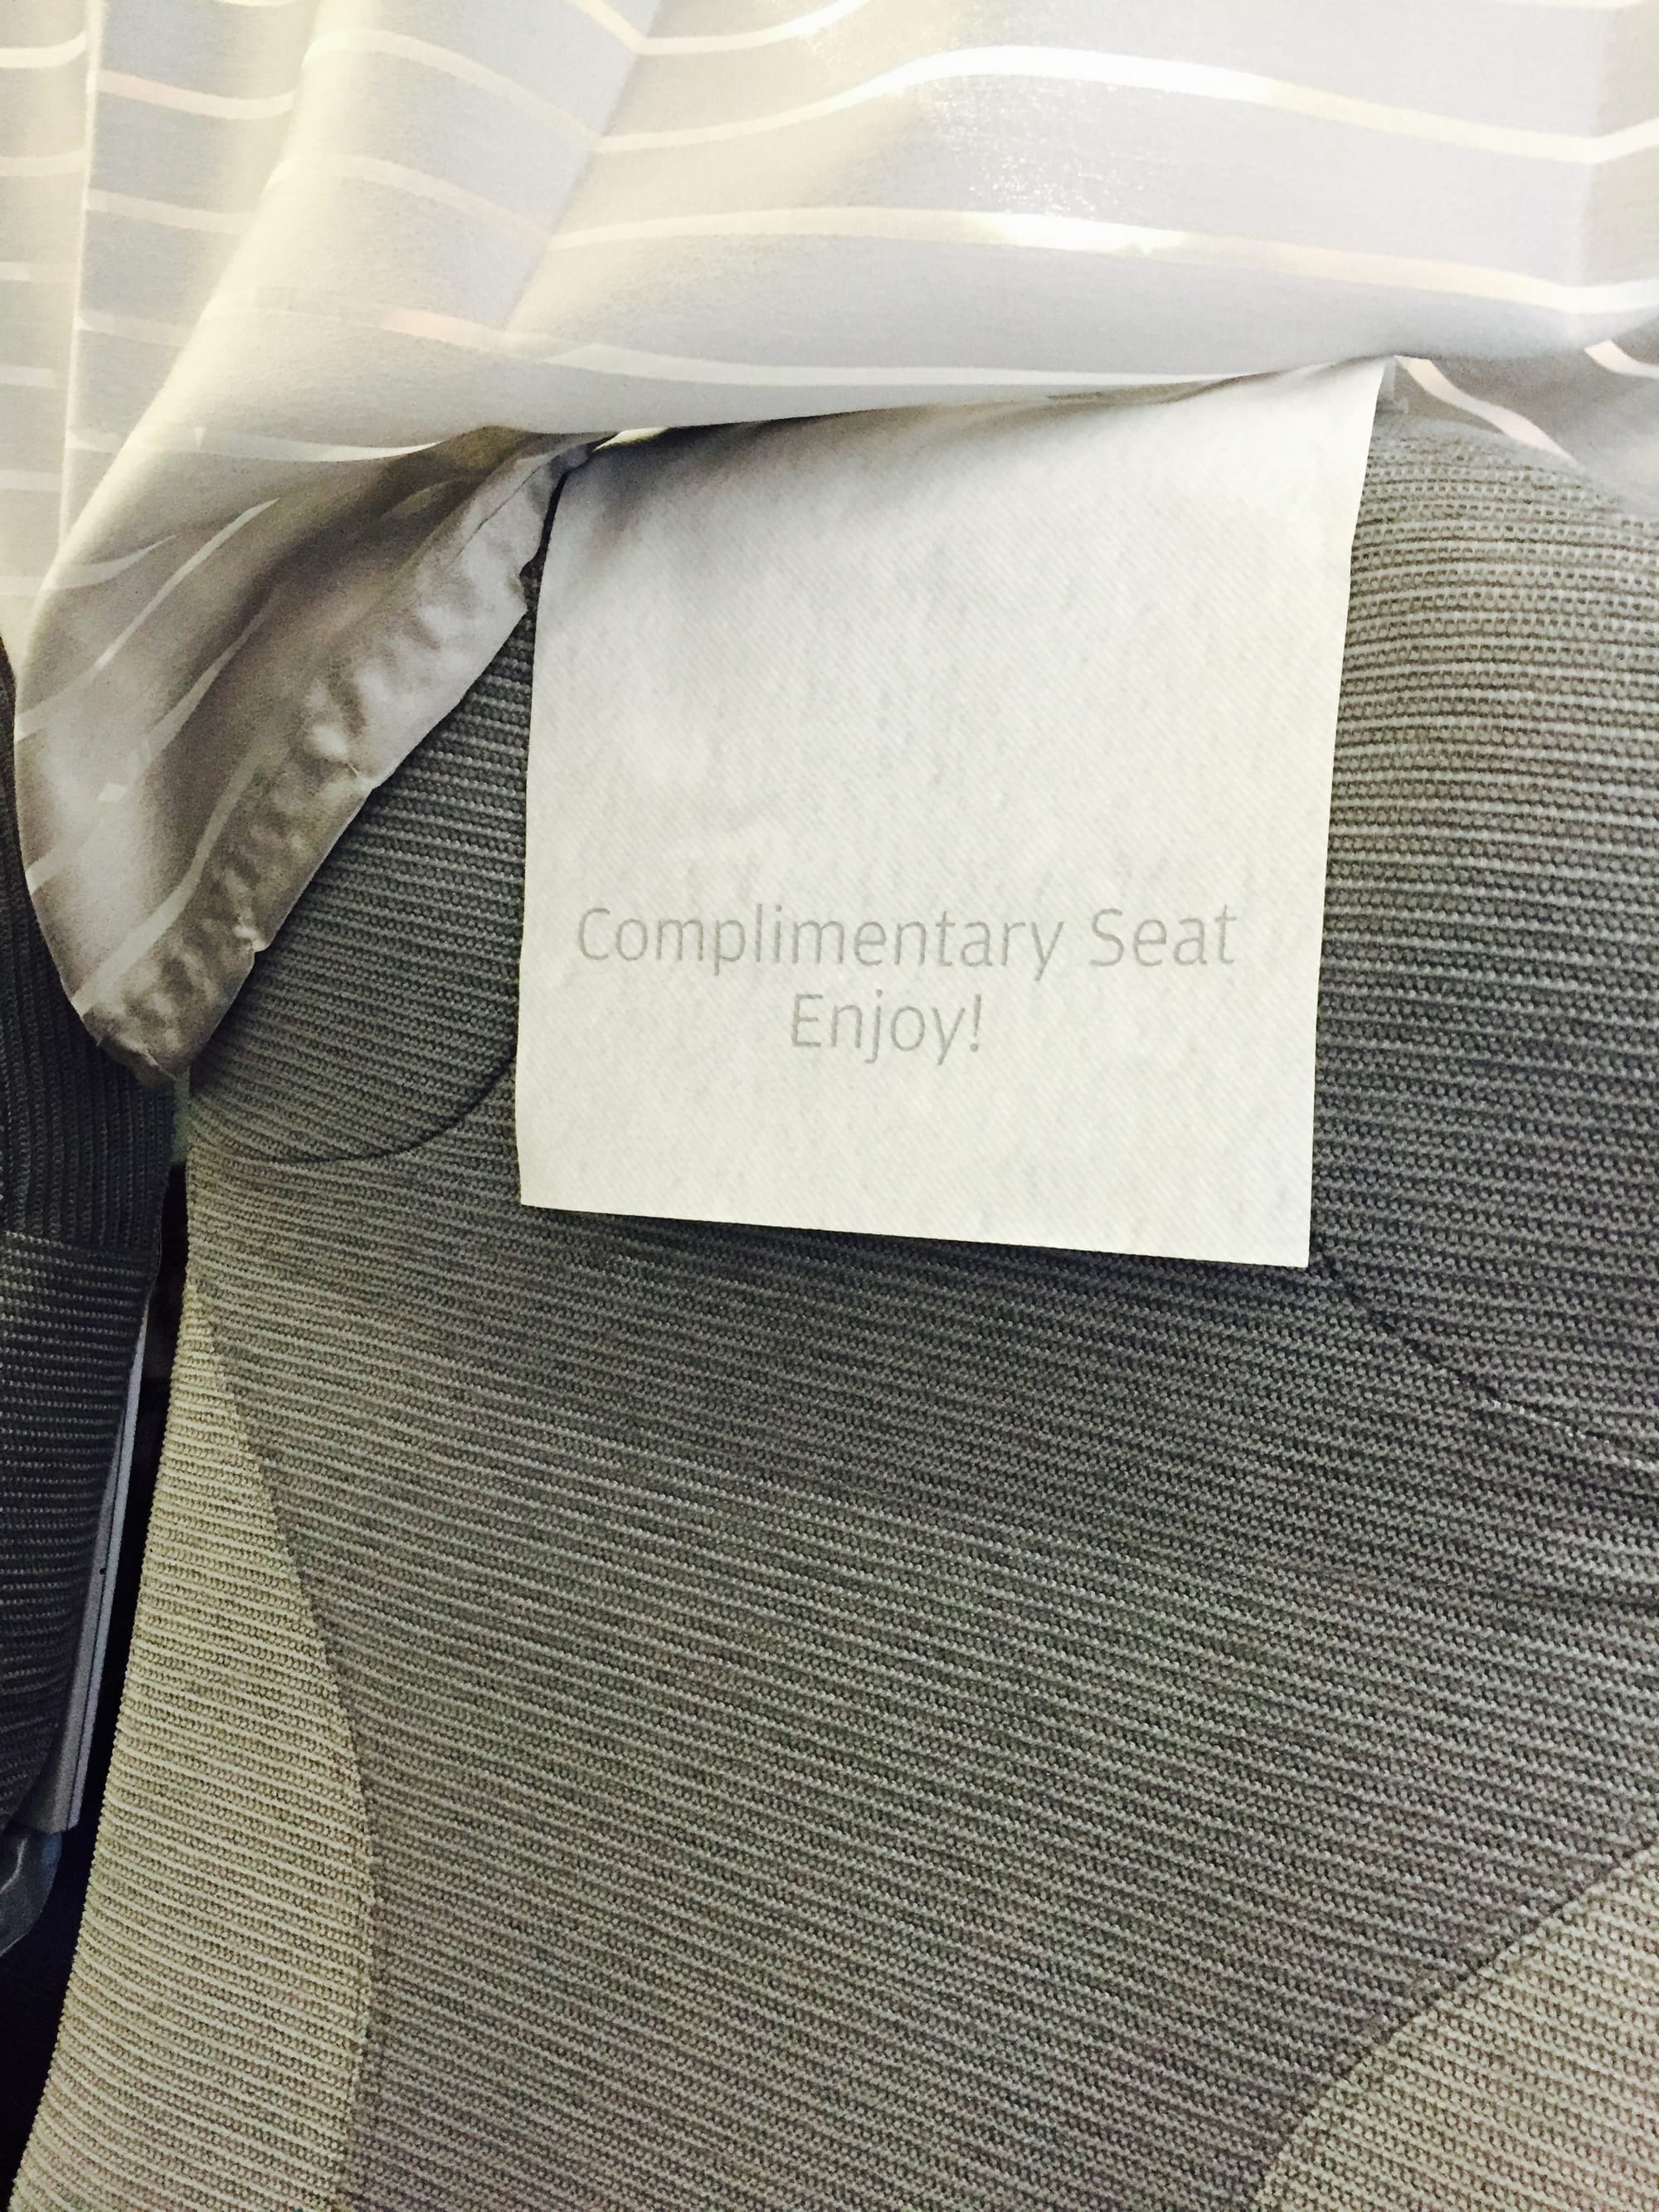 Photo by Author — FinnAir business class — you get an empty seat next to you